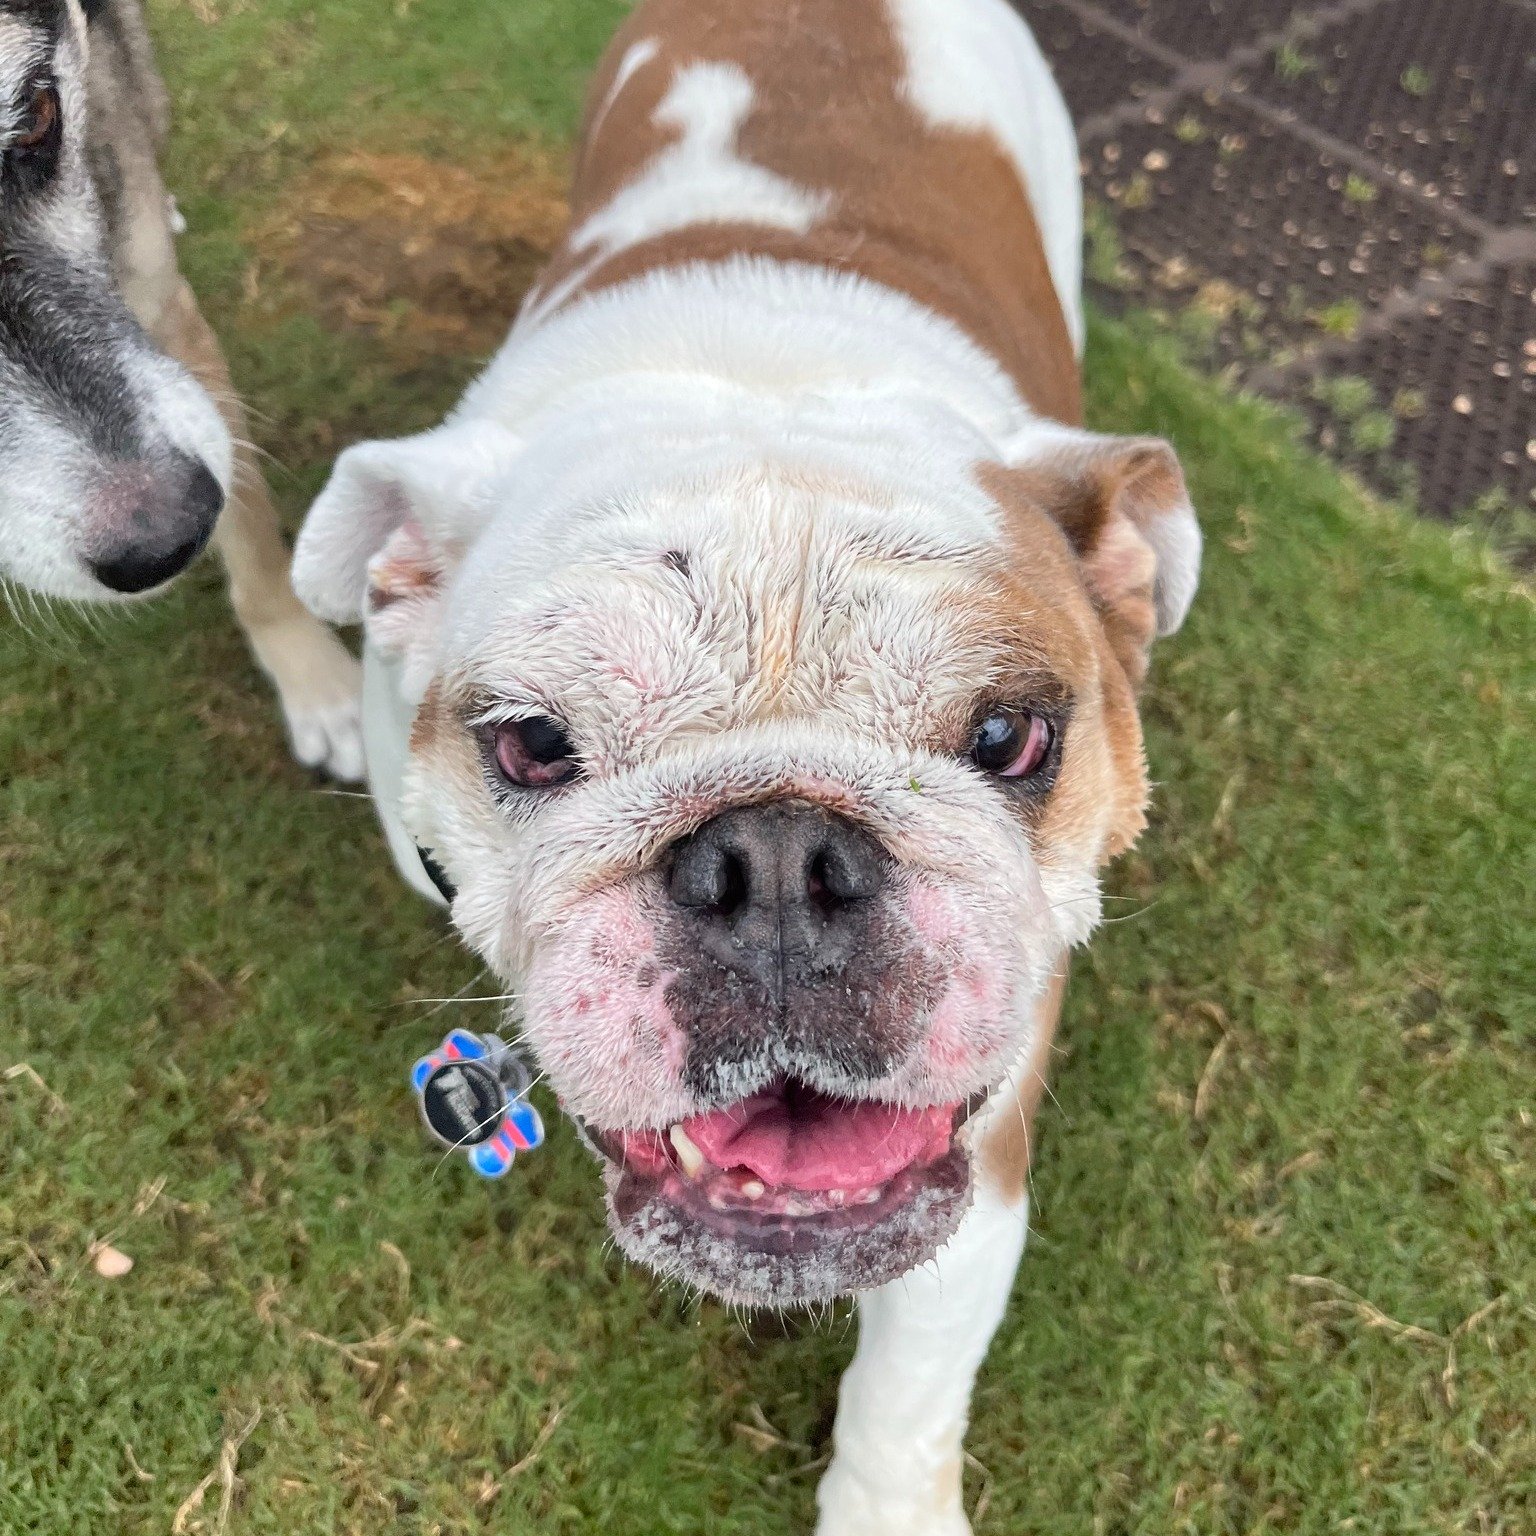 Everybody please give a warm welcome to Miss Piggy! Miss Piggy is enjoying her time sniffing around and she LOVES to get head scratches. We can't wait to see more of her in the future! Enjoying the ranch today as well is Cleo, Lulu, Jira, Josie, Henr